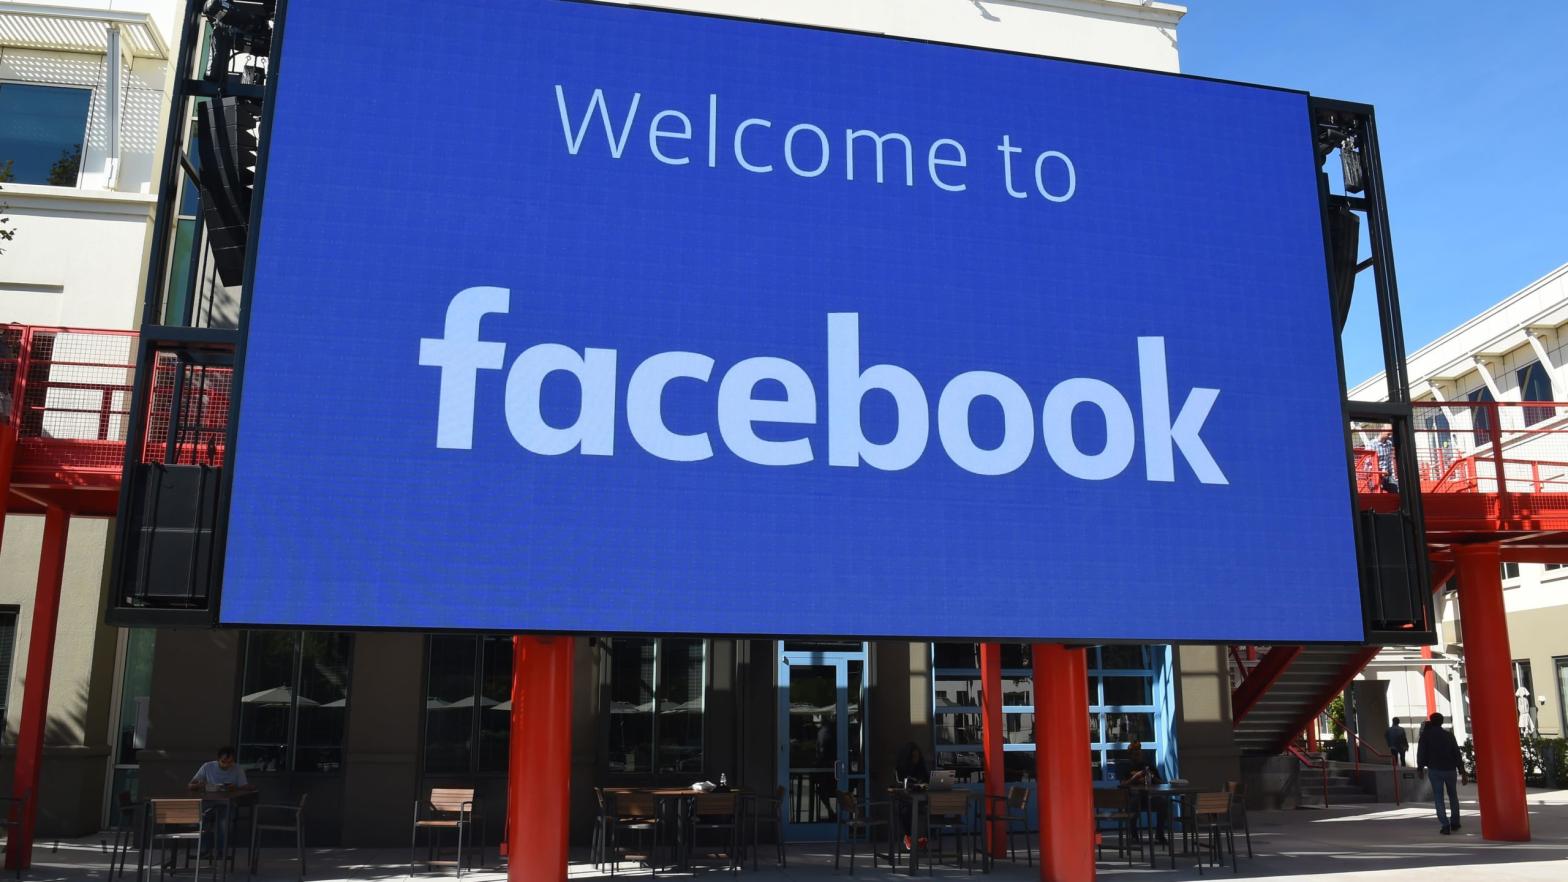 A giant digital sign is seen at Facebook's corporate headquarters campus in Menlo Park, California. (Photo: Josh Edelson, Getty Images)